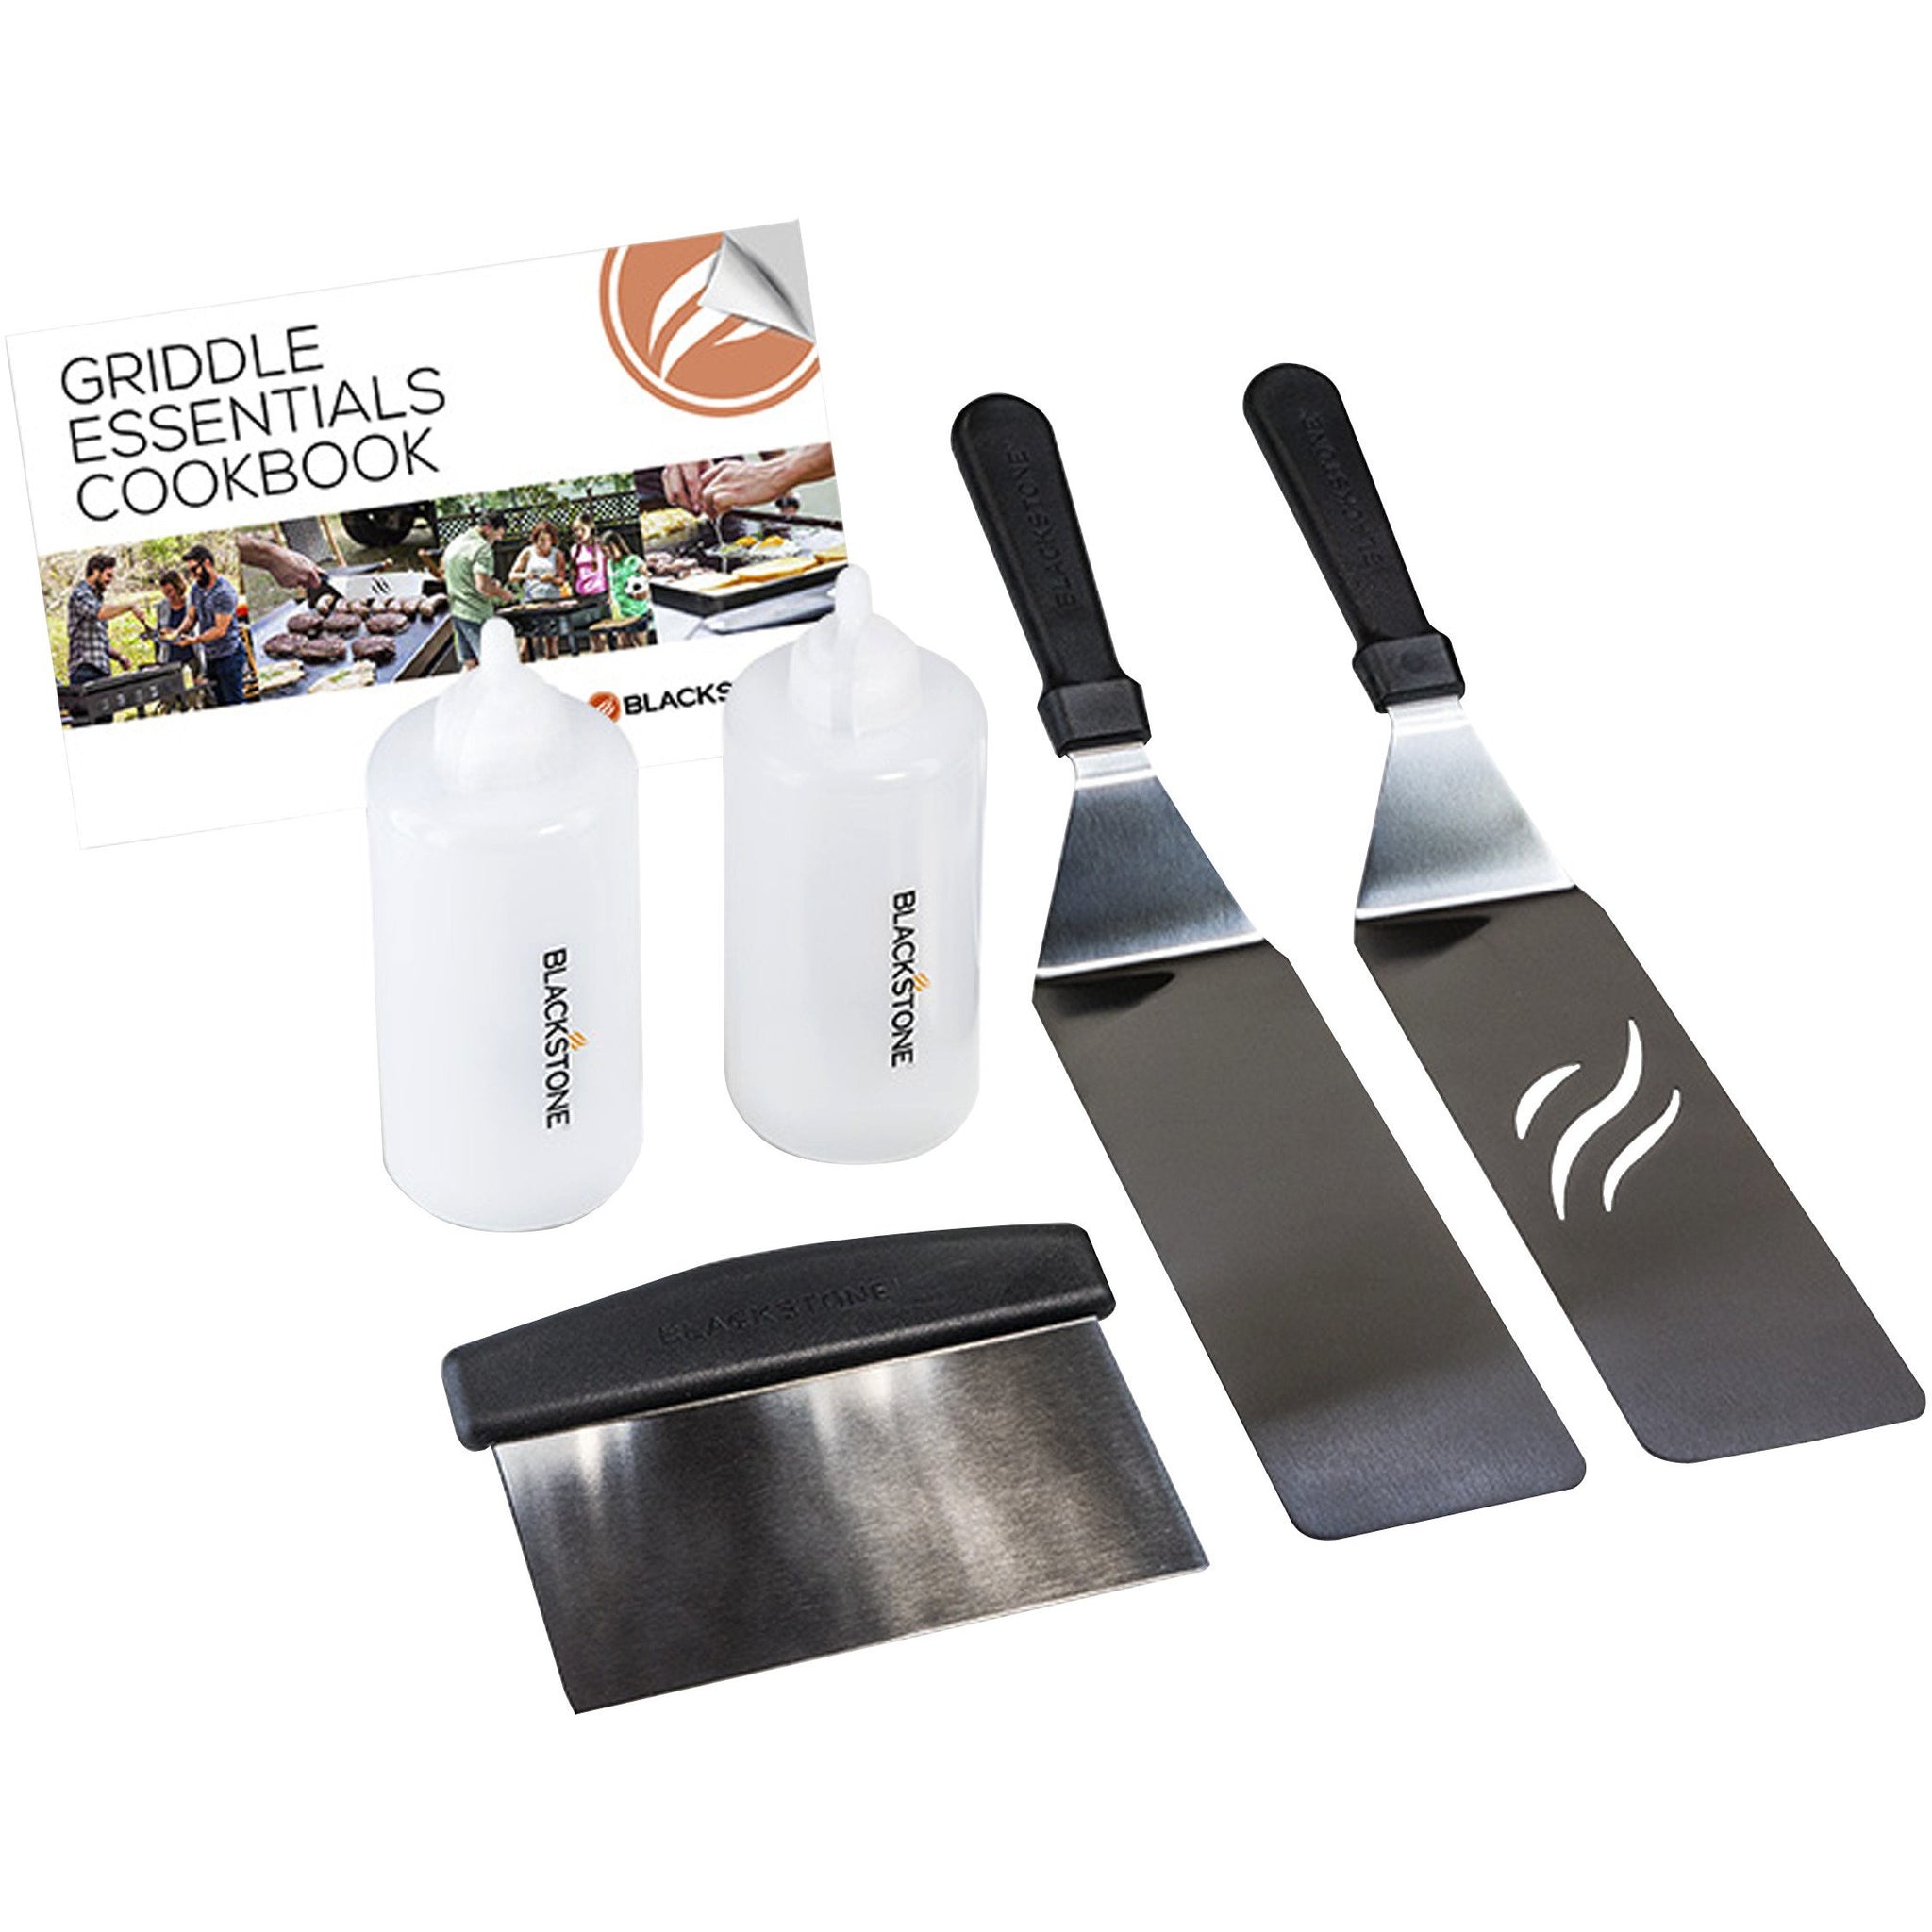 15 Must-Have Blackstone Accessories for Griddle Cooking – re·dact